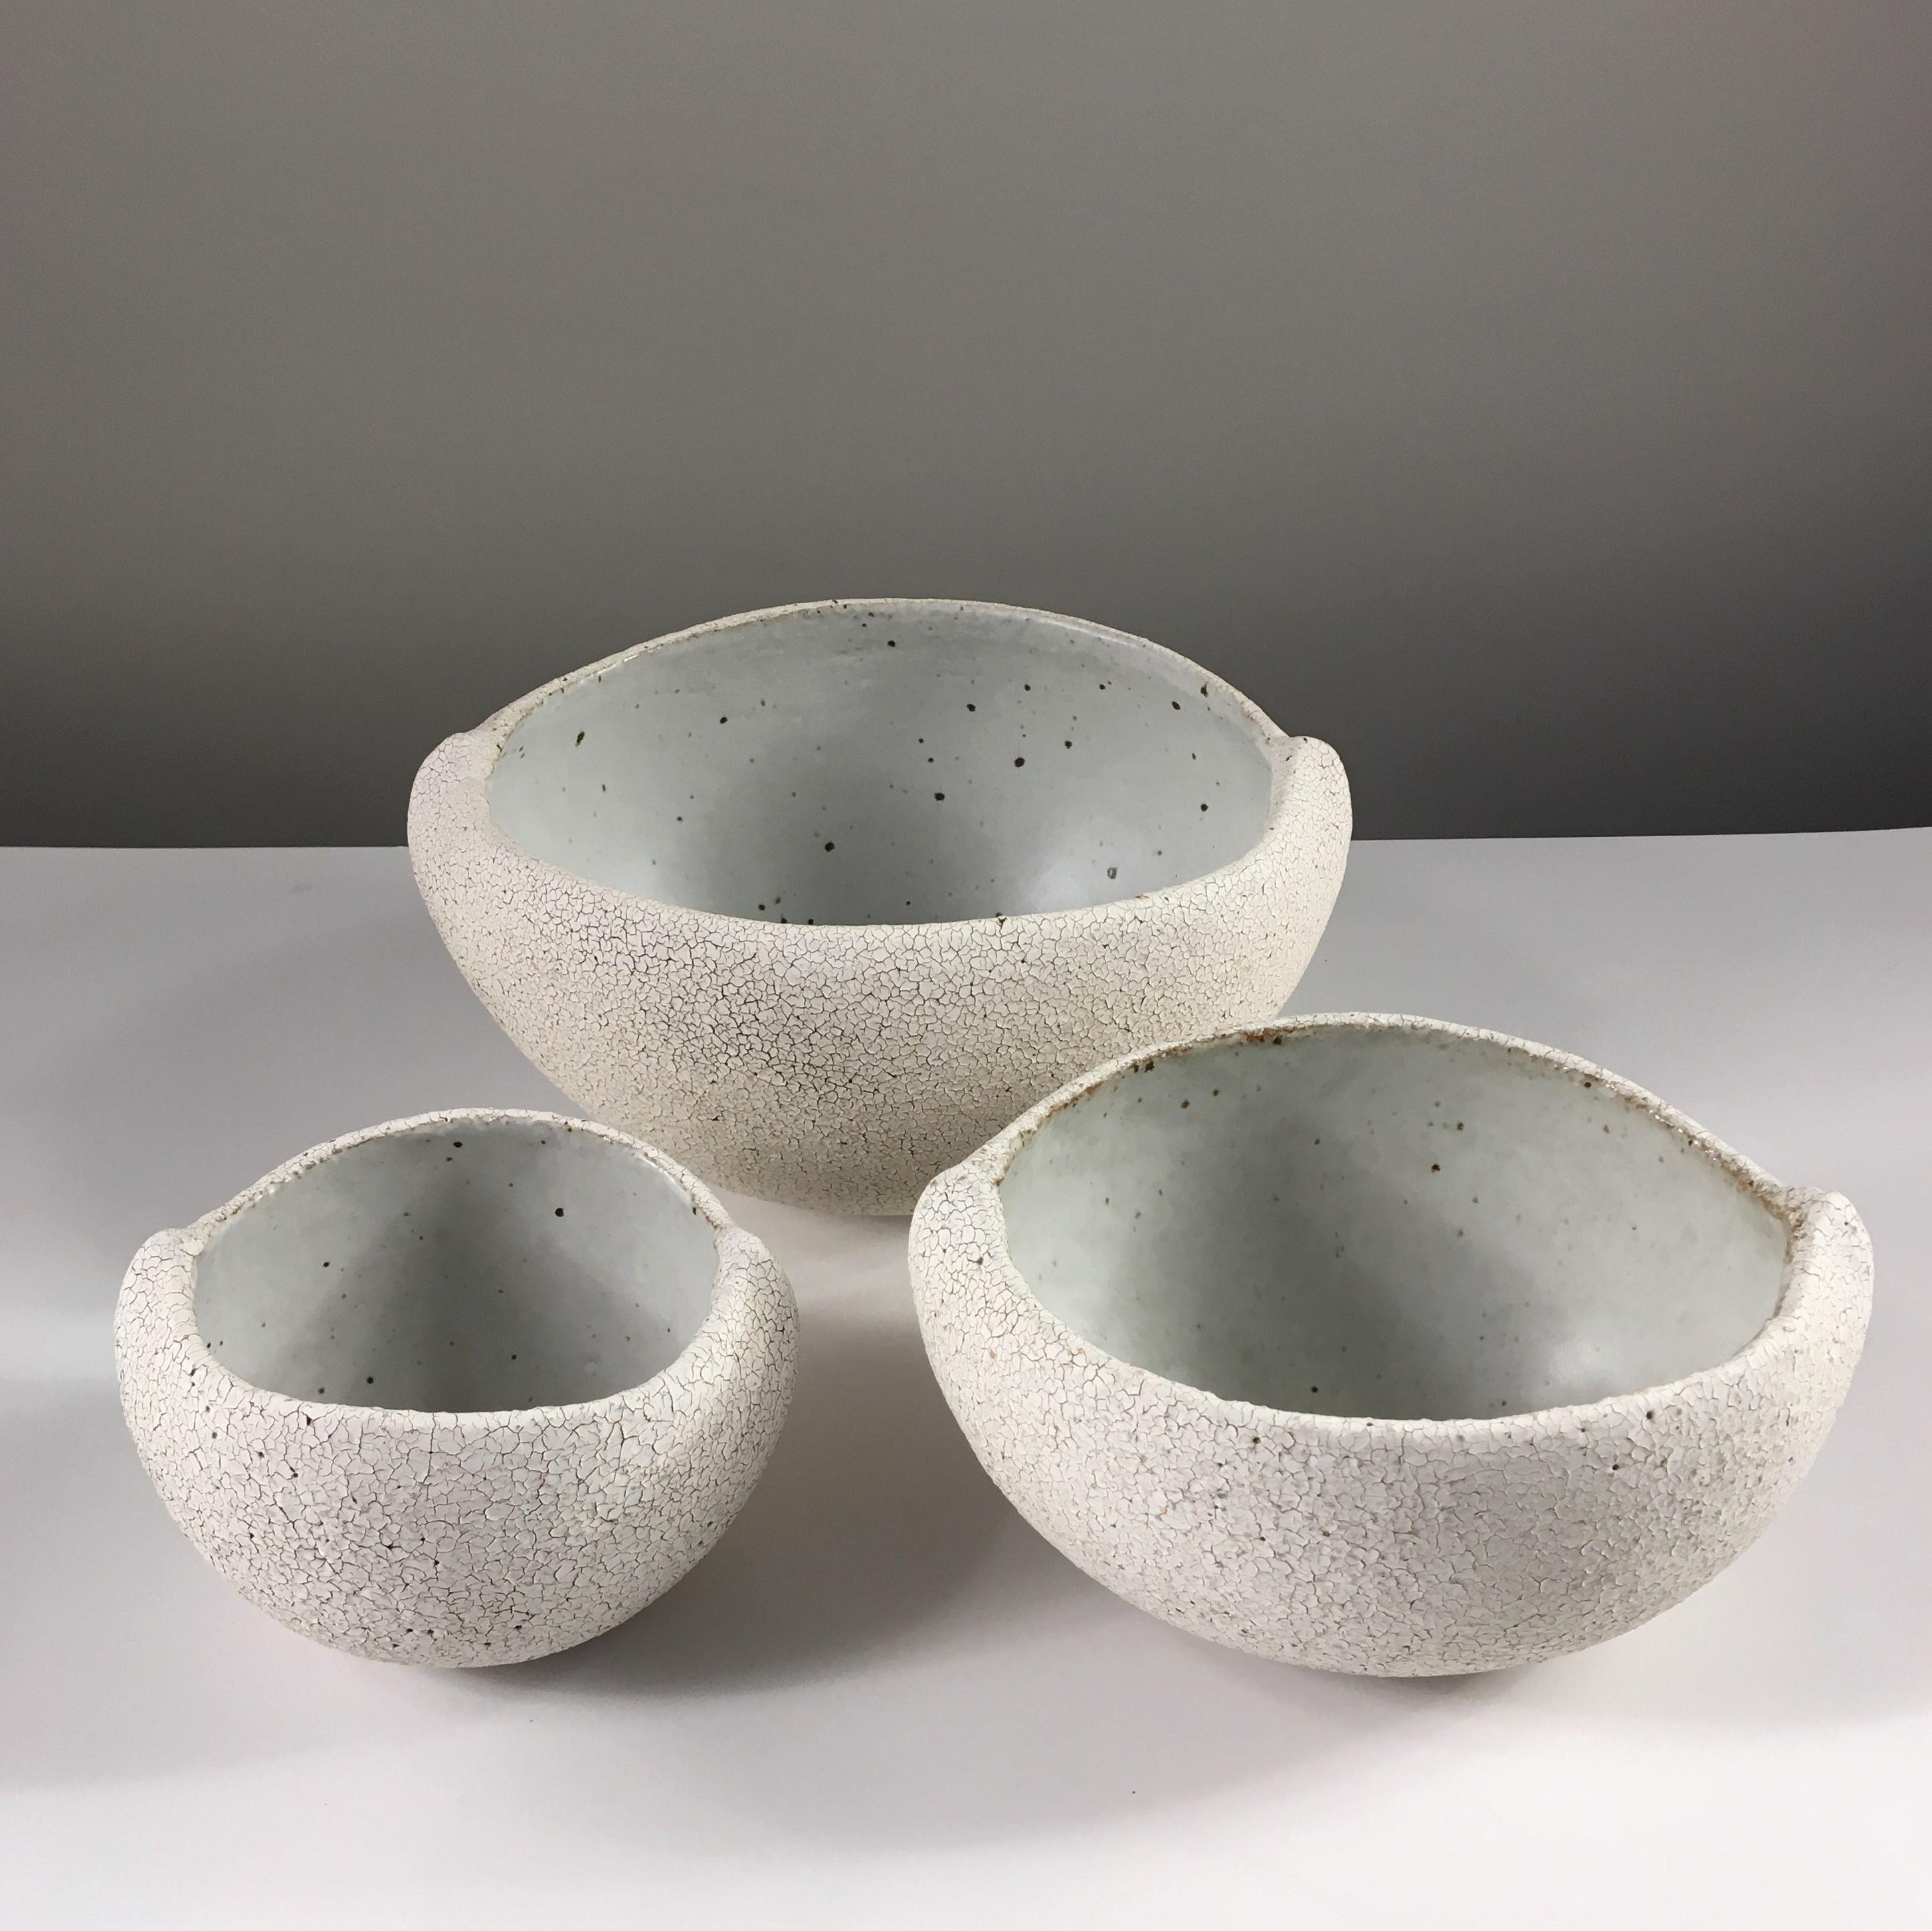 Organic Modern Set of 3 Nested Bowls with Light Grey Inner Glaze by Yumiko Kuga For Sale